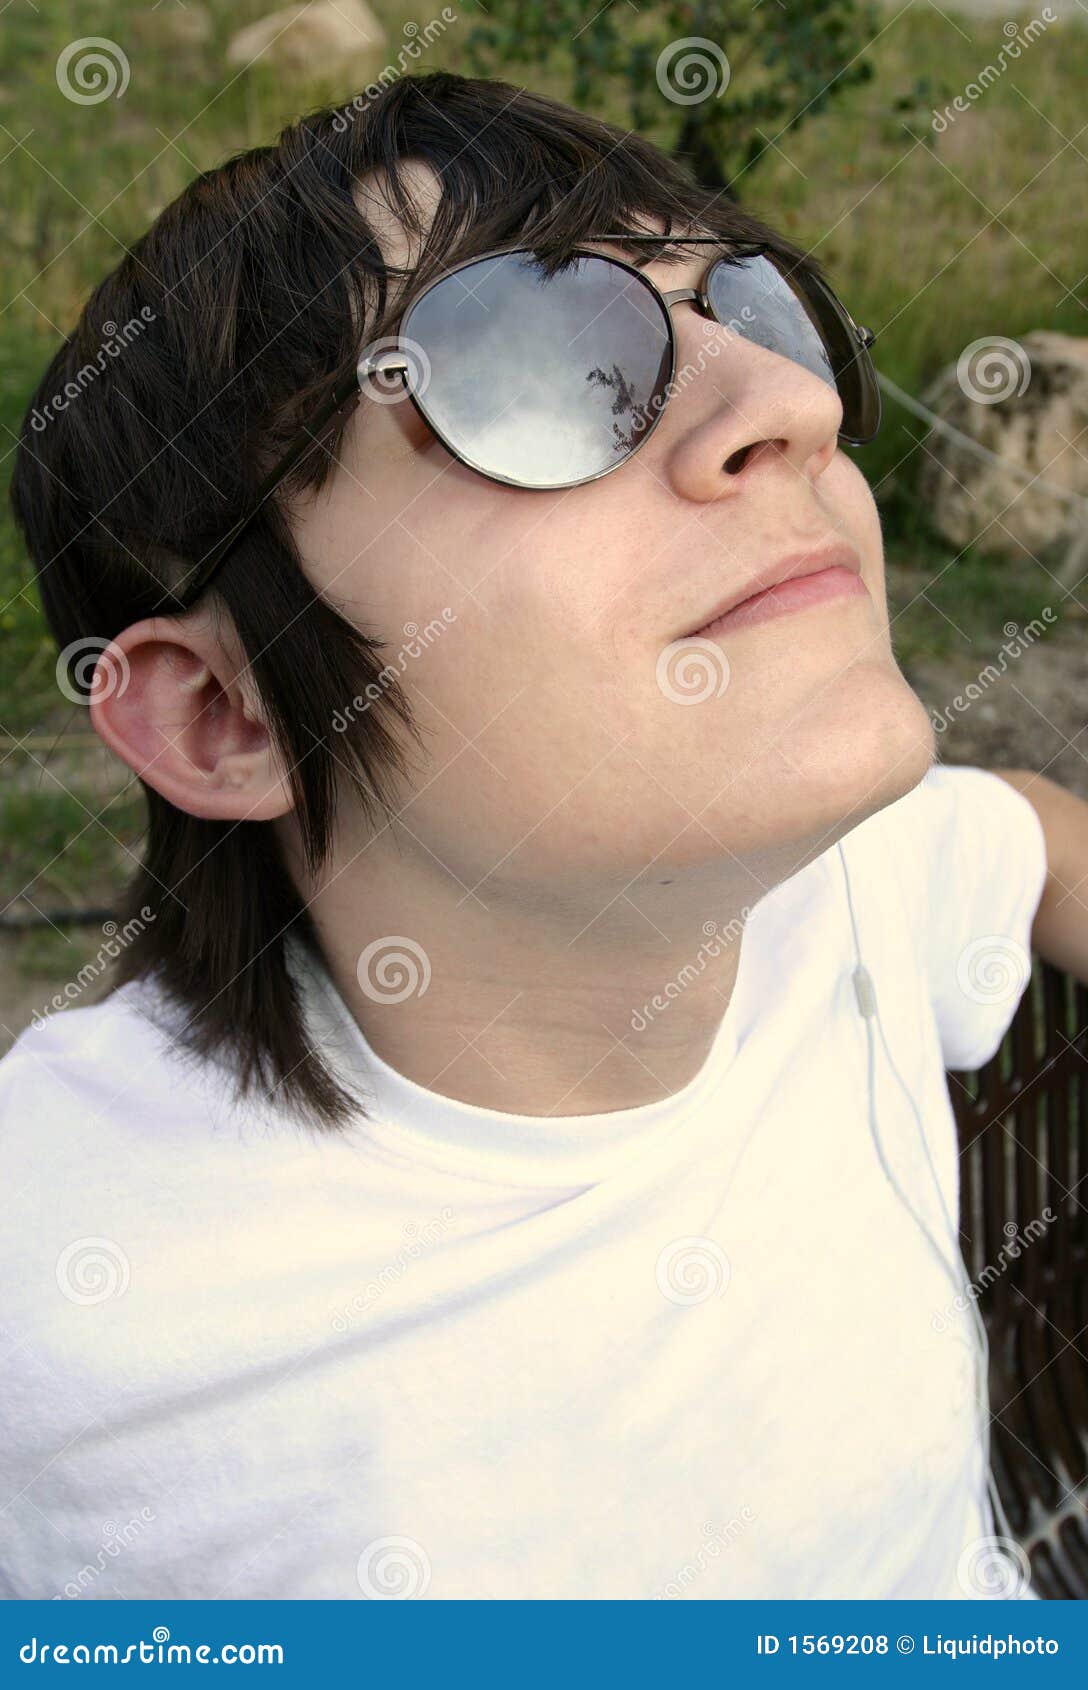 Teen Looking Up Royalty Free Stock Photos - Image: 1569208